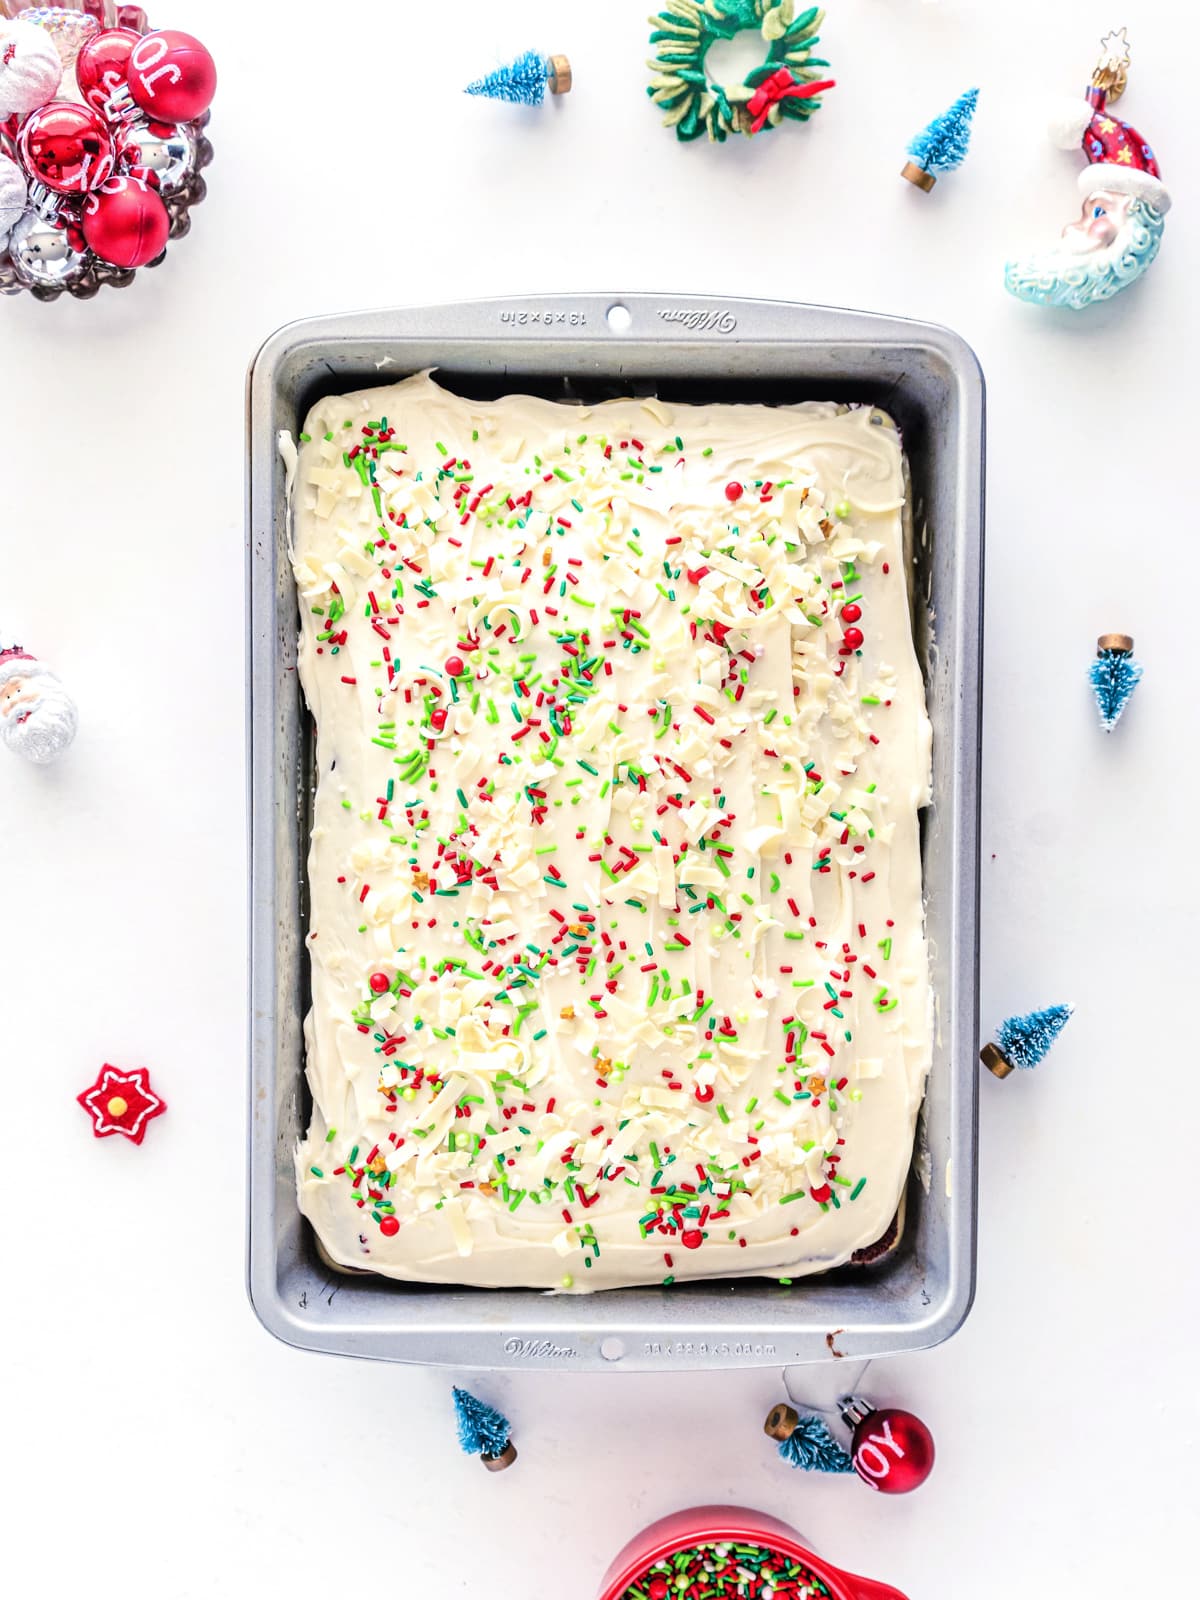 top with white chocolate and sprinkles